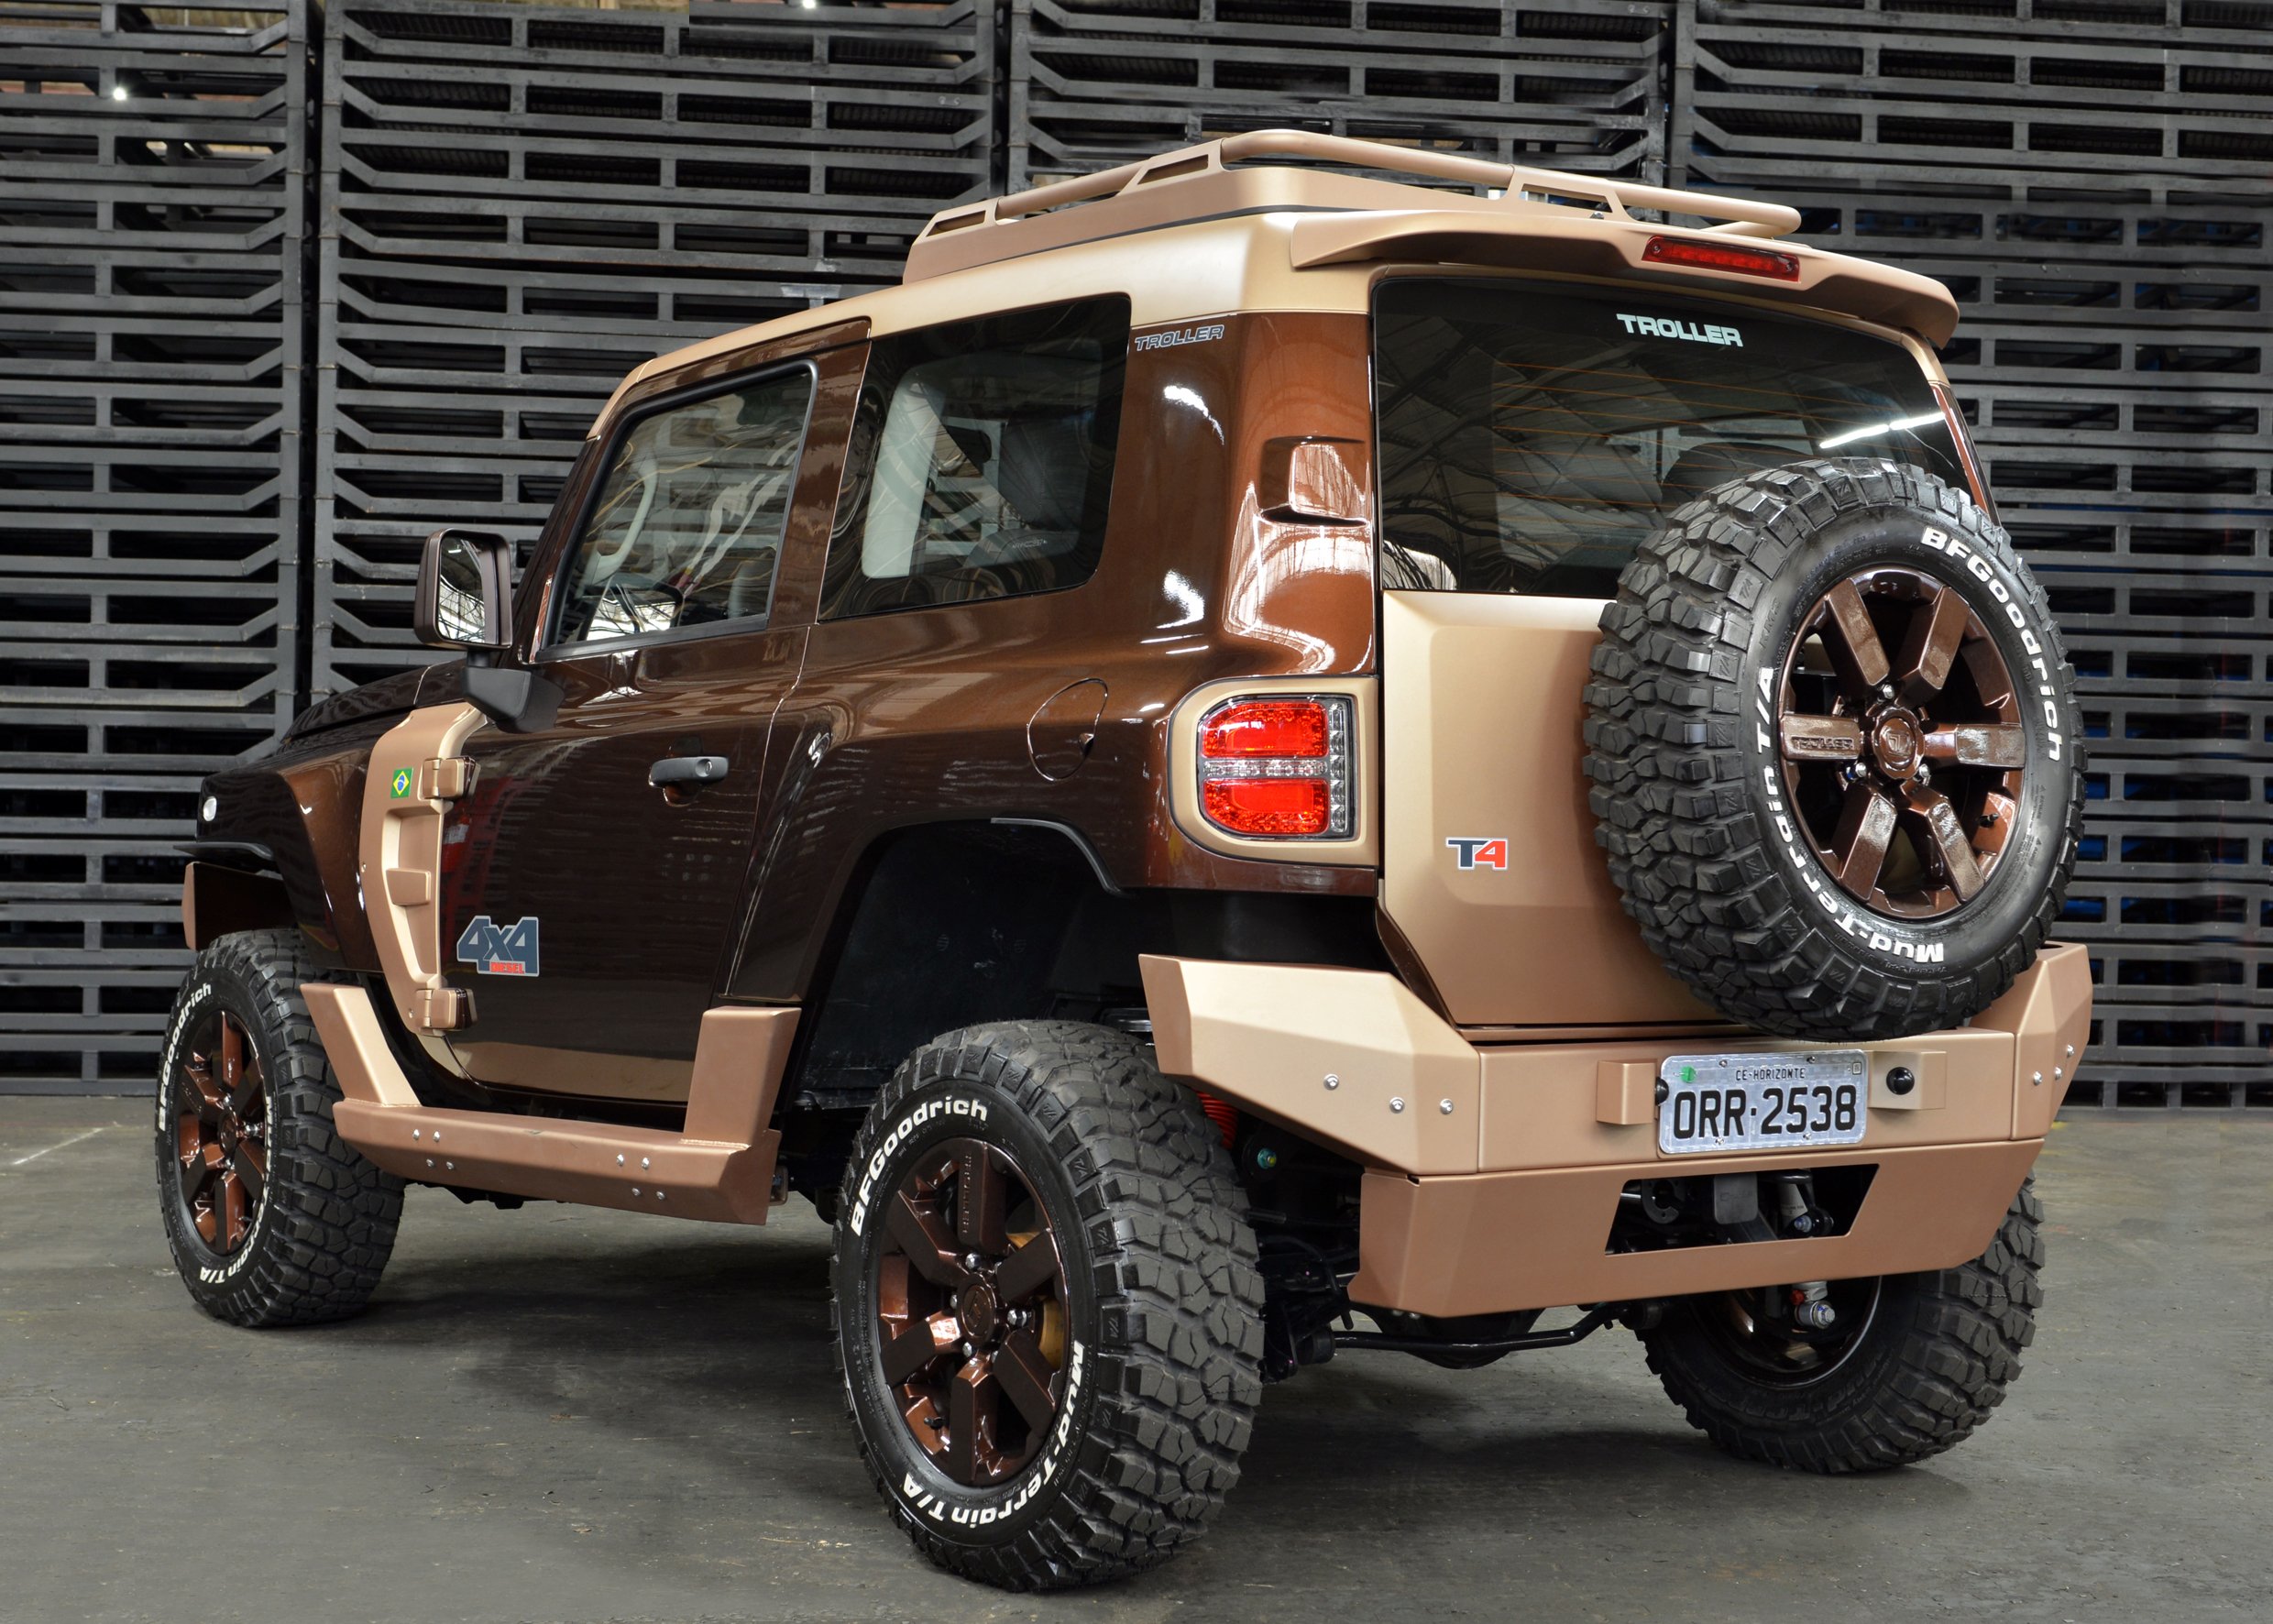 2014, Troller, T 4, Off road, Concept, Awd, 4x4, Suv Wallpaper